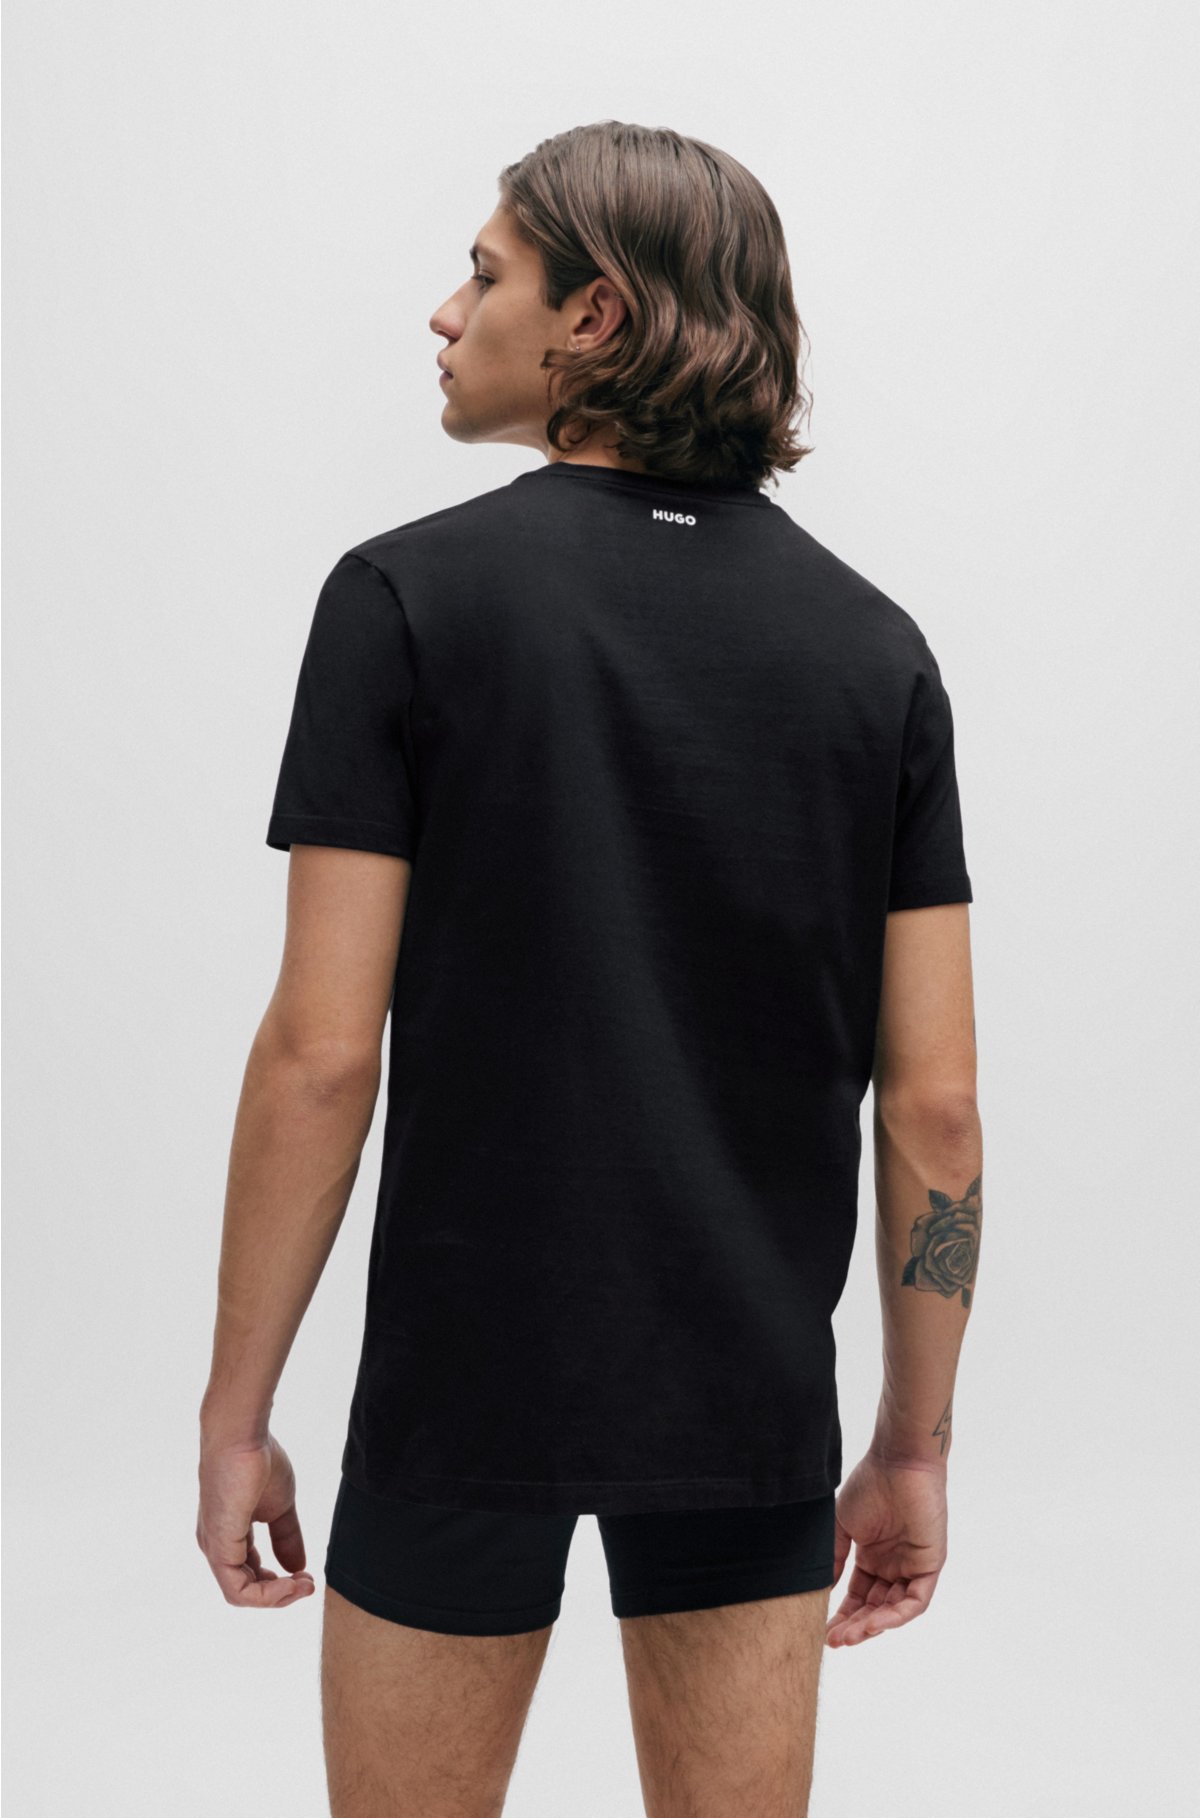 HUGO T-shirts stretch in Two-pack - of cotton slim-fit